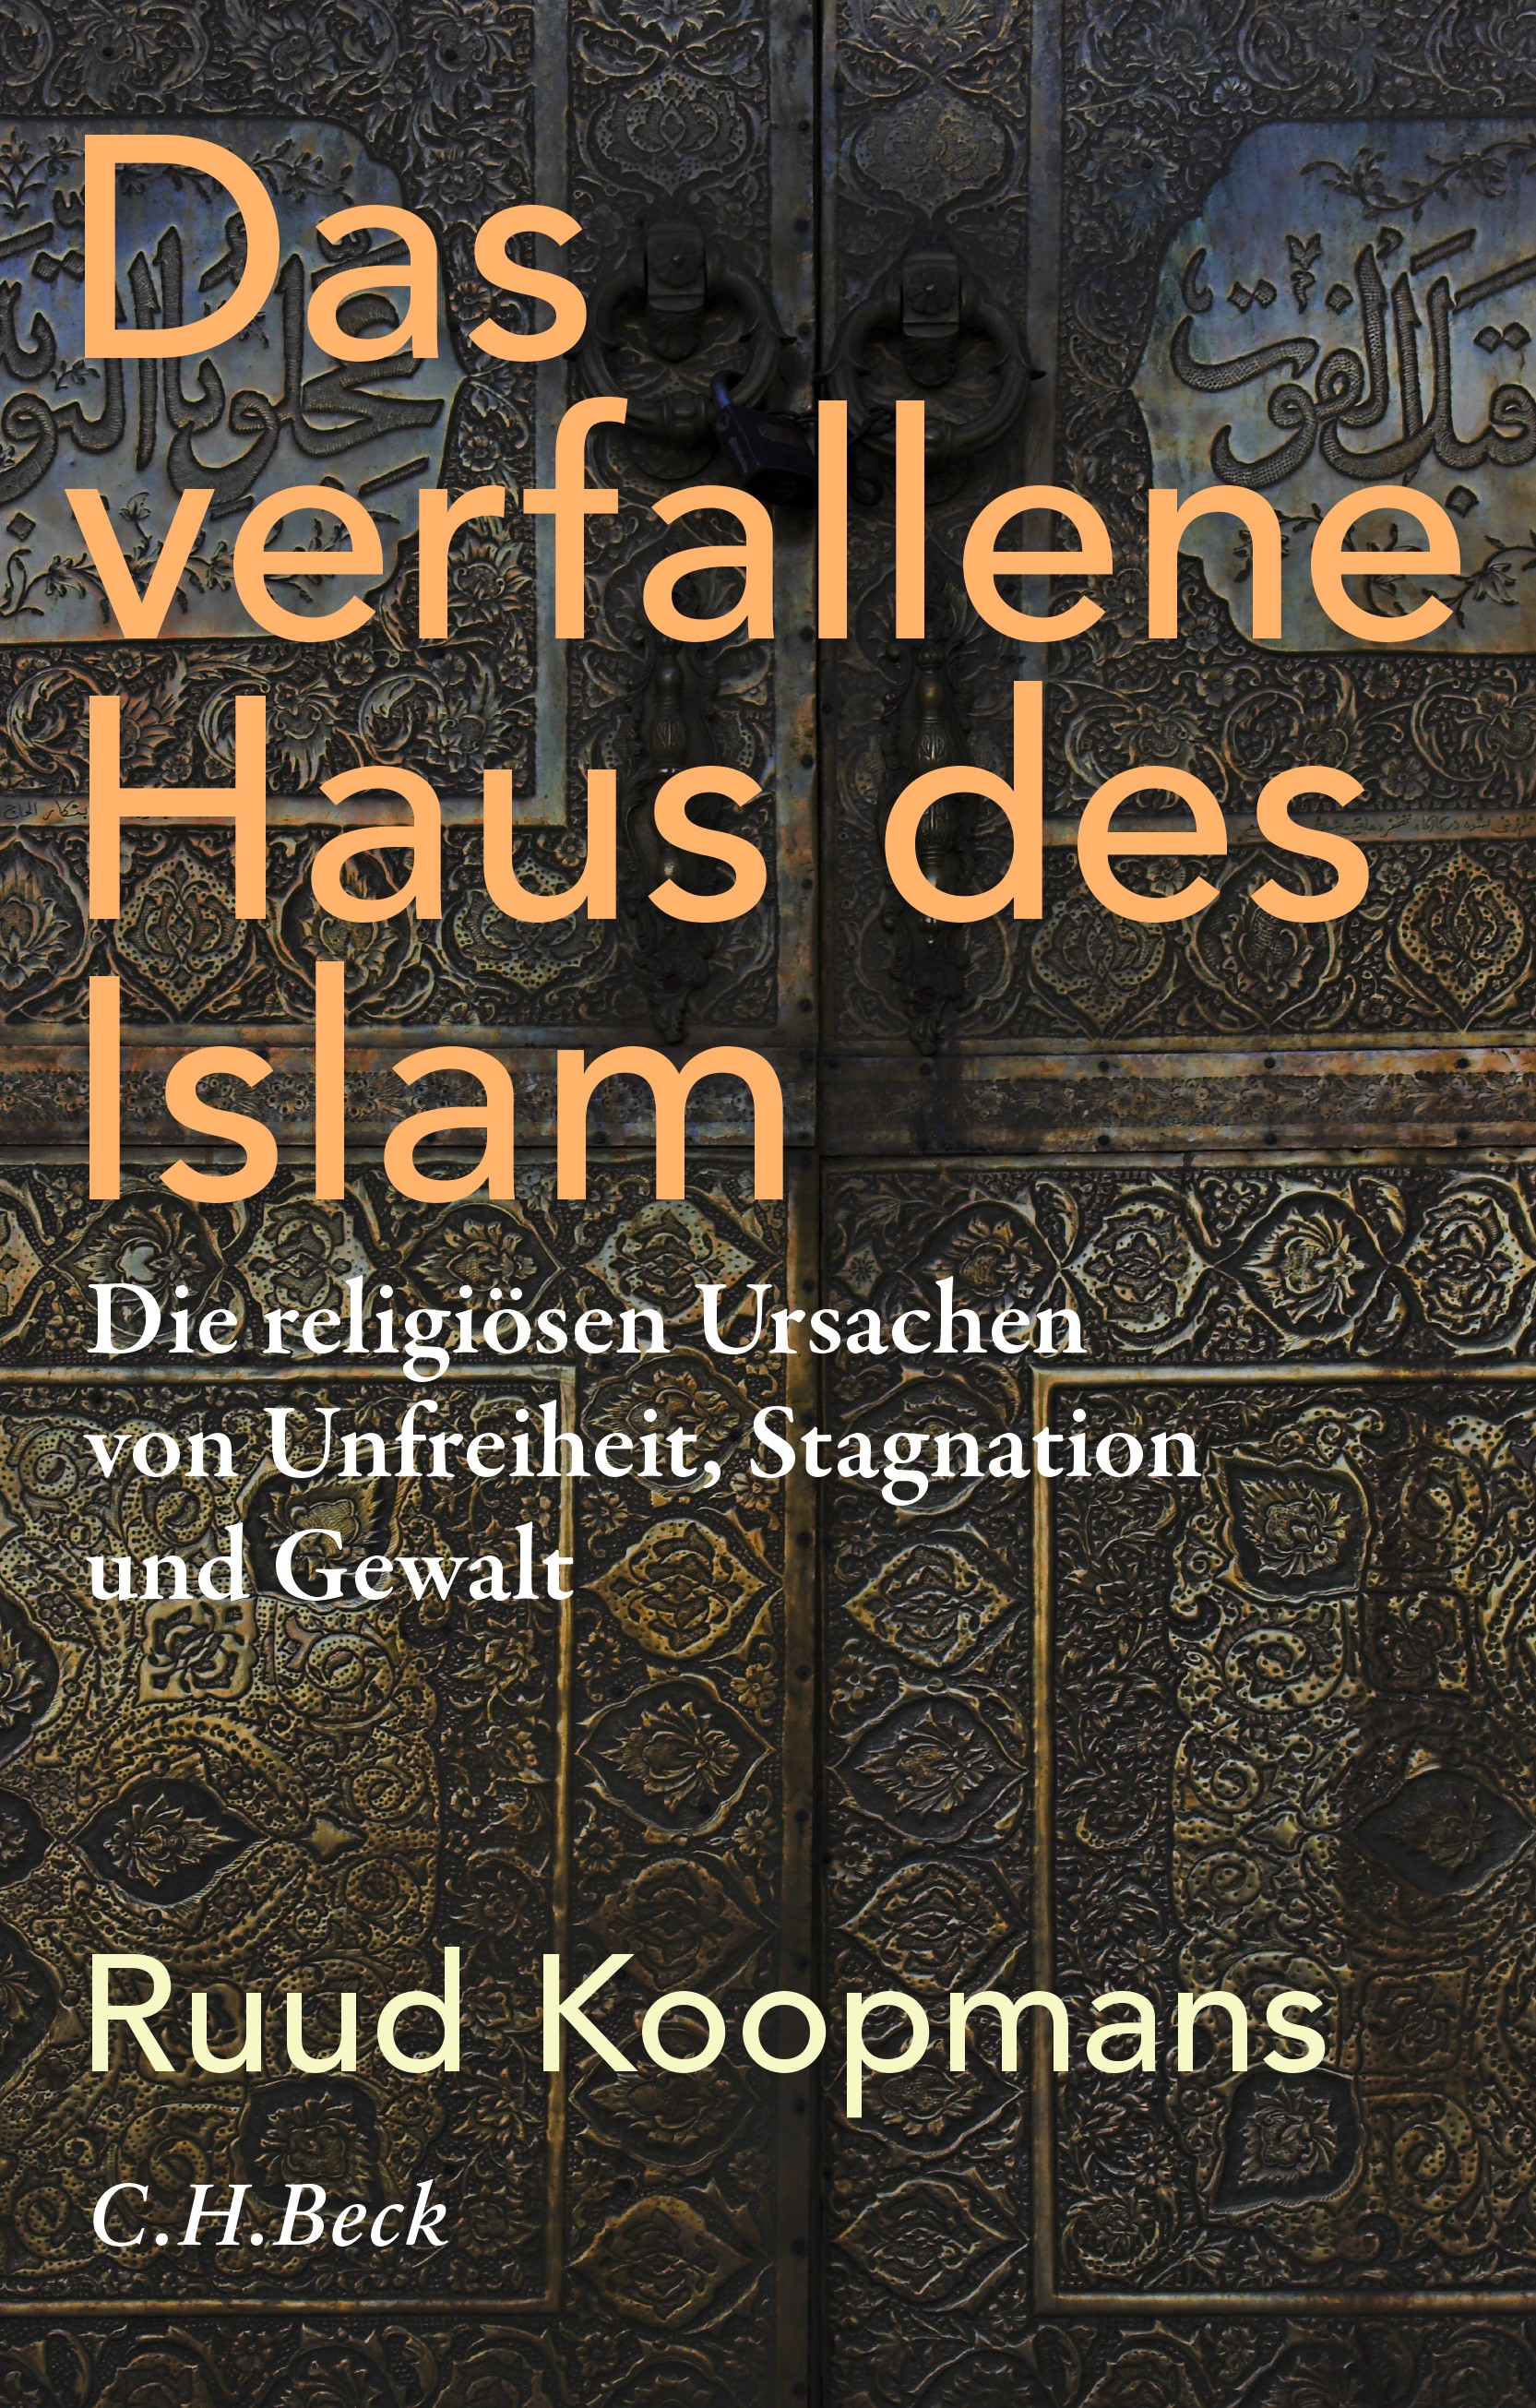 Cover of Ruud Koopmans' "Das verfallene Haus des Islam" (published by C. H. Beck)